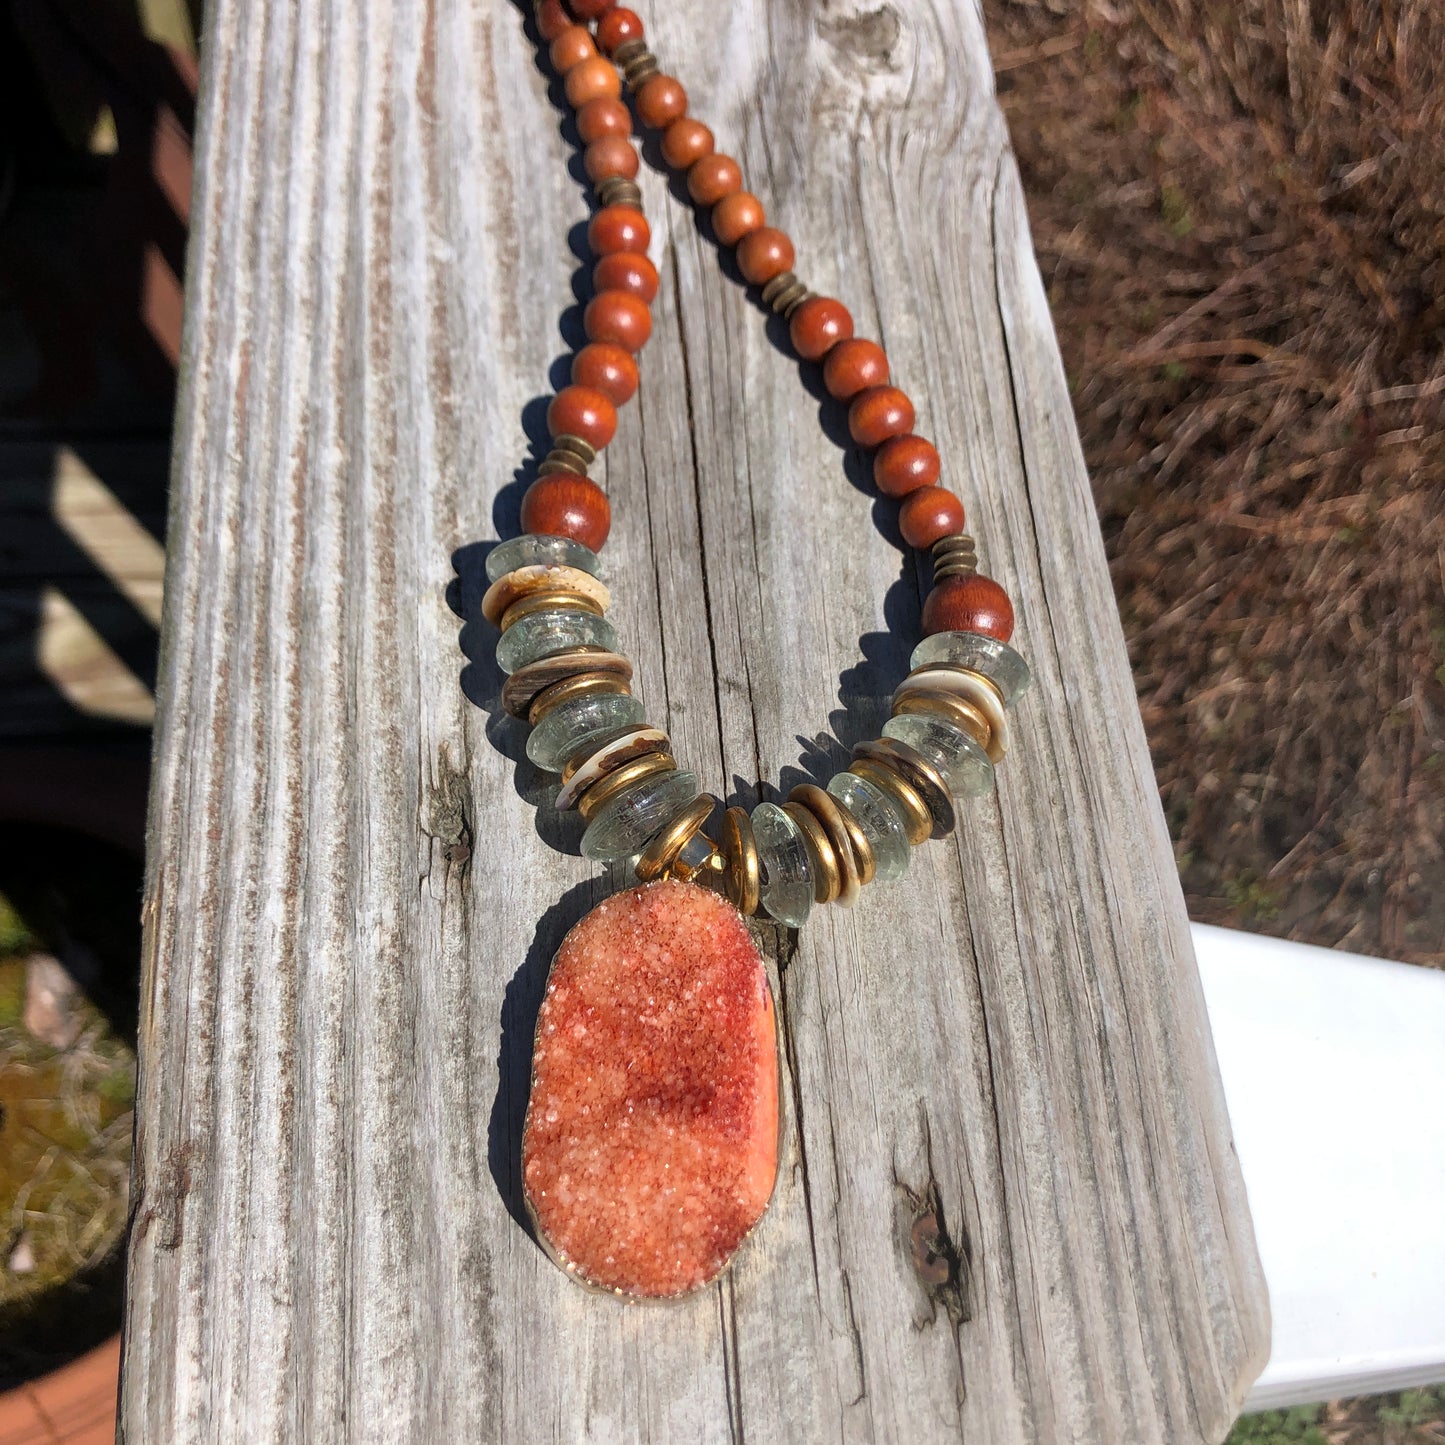 Rustic Orange Druzy and Wood Bead Necklace, 18 inches add 2 inch Stone pendant